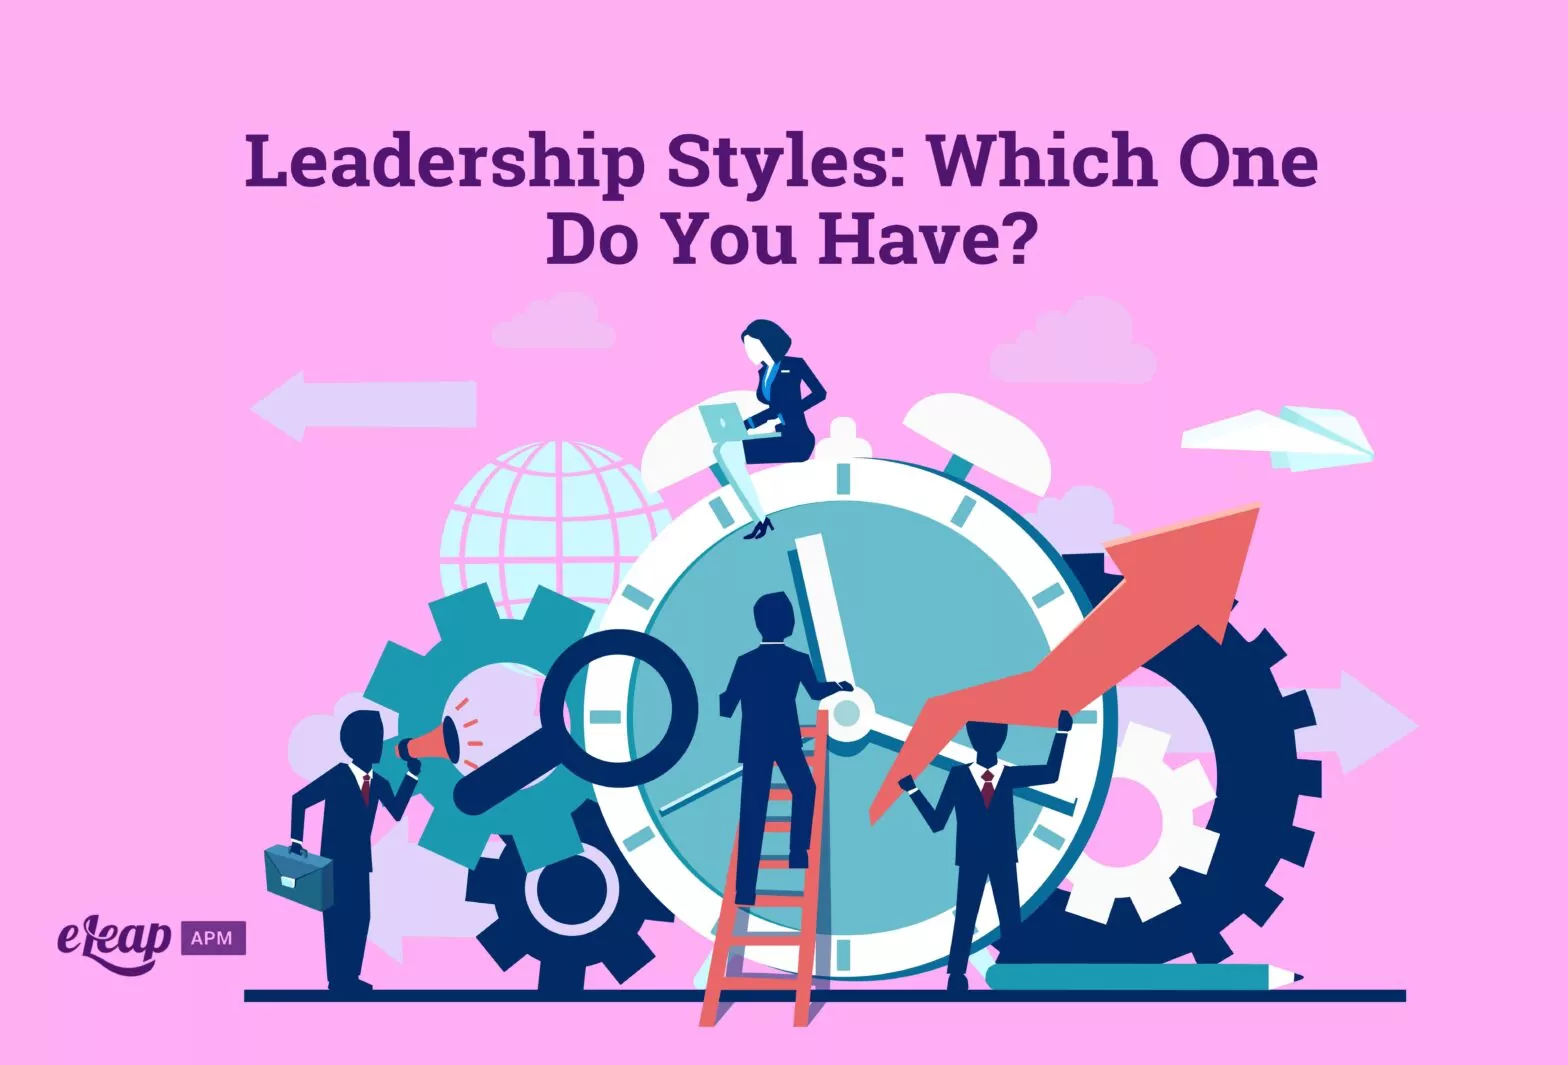 Leadership Styles: Which One Do You Have?